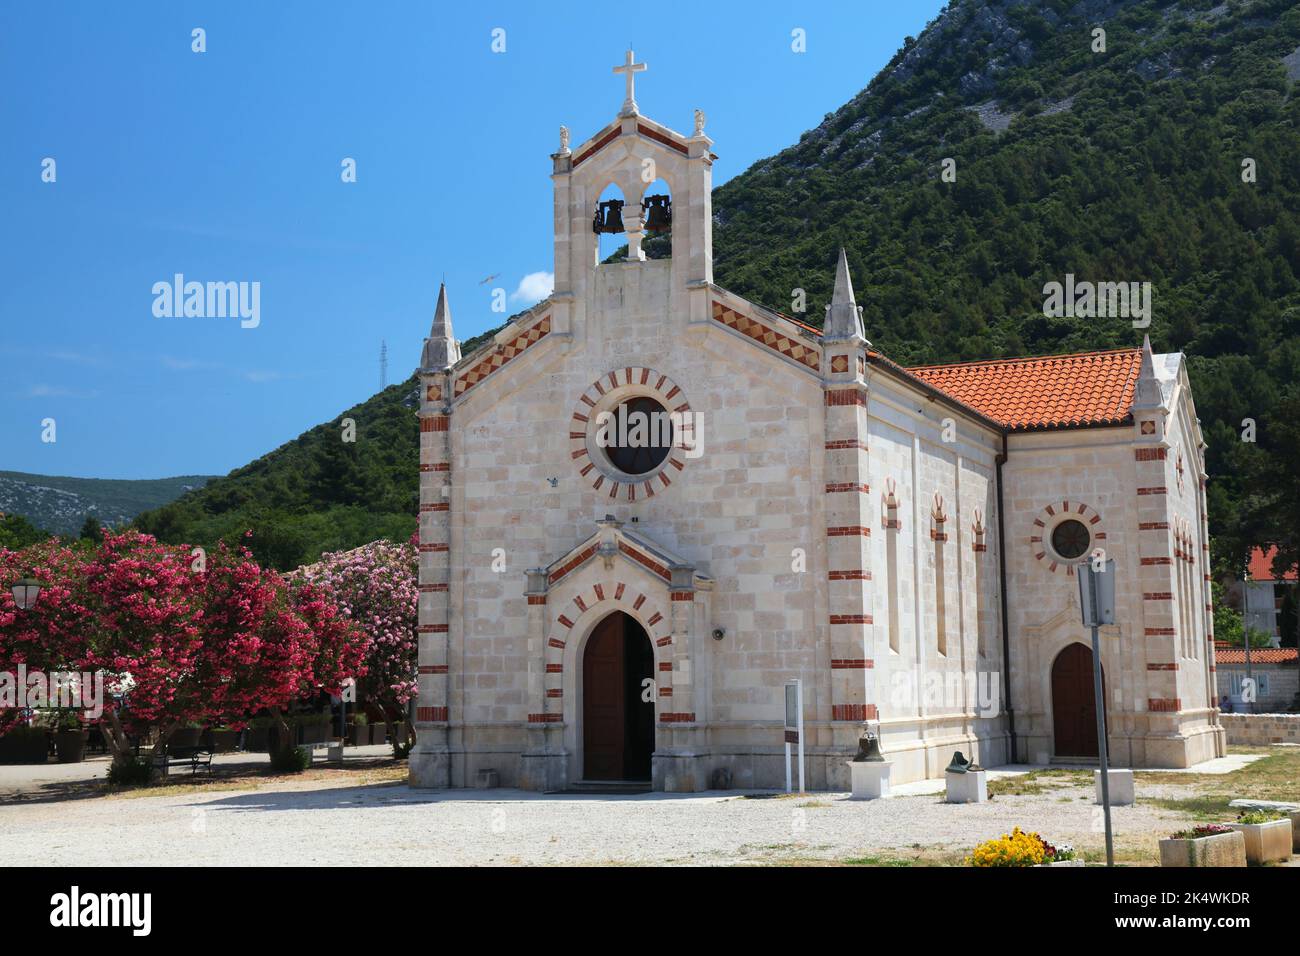 Ston, Croatia. Old town church and oleander trees in bloom. Stock Photo